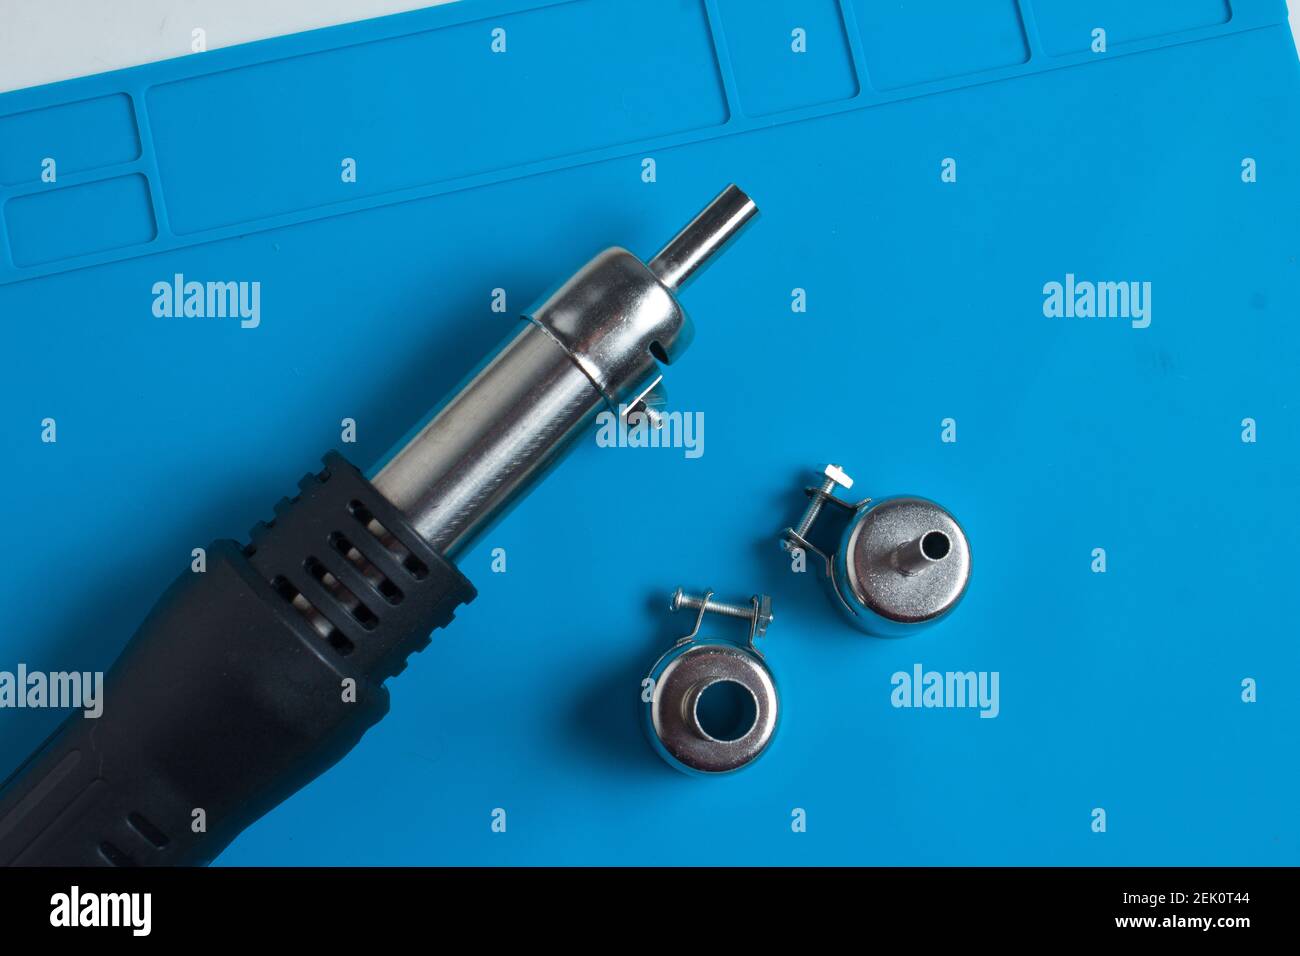 Hot air gun for soldering, and additional attachments to it, on the background of a blue mat Stock Photo